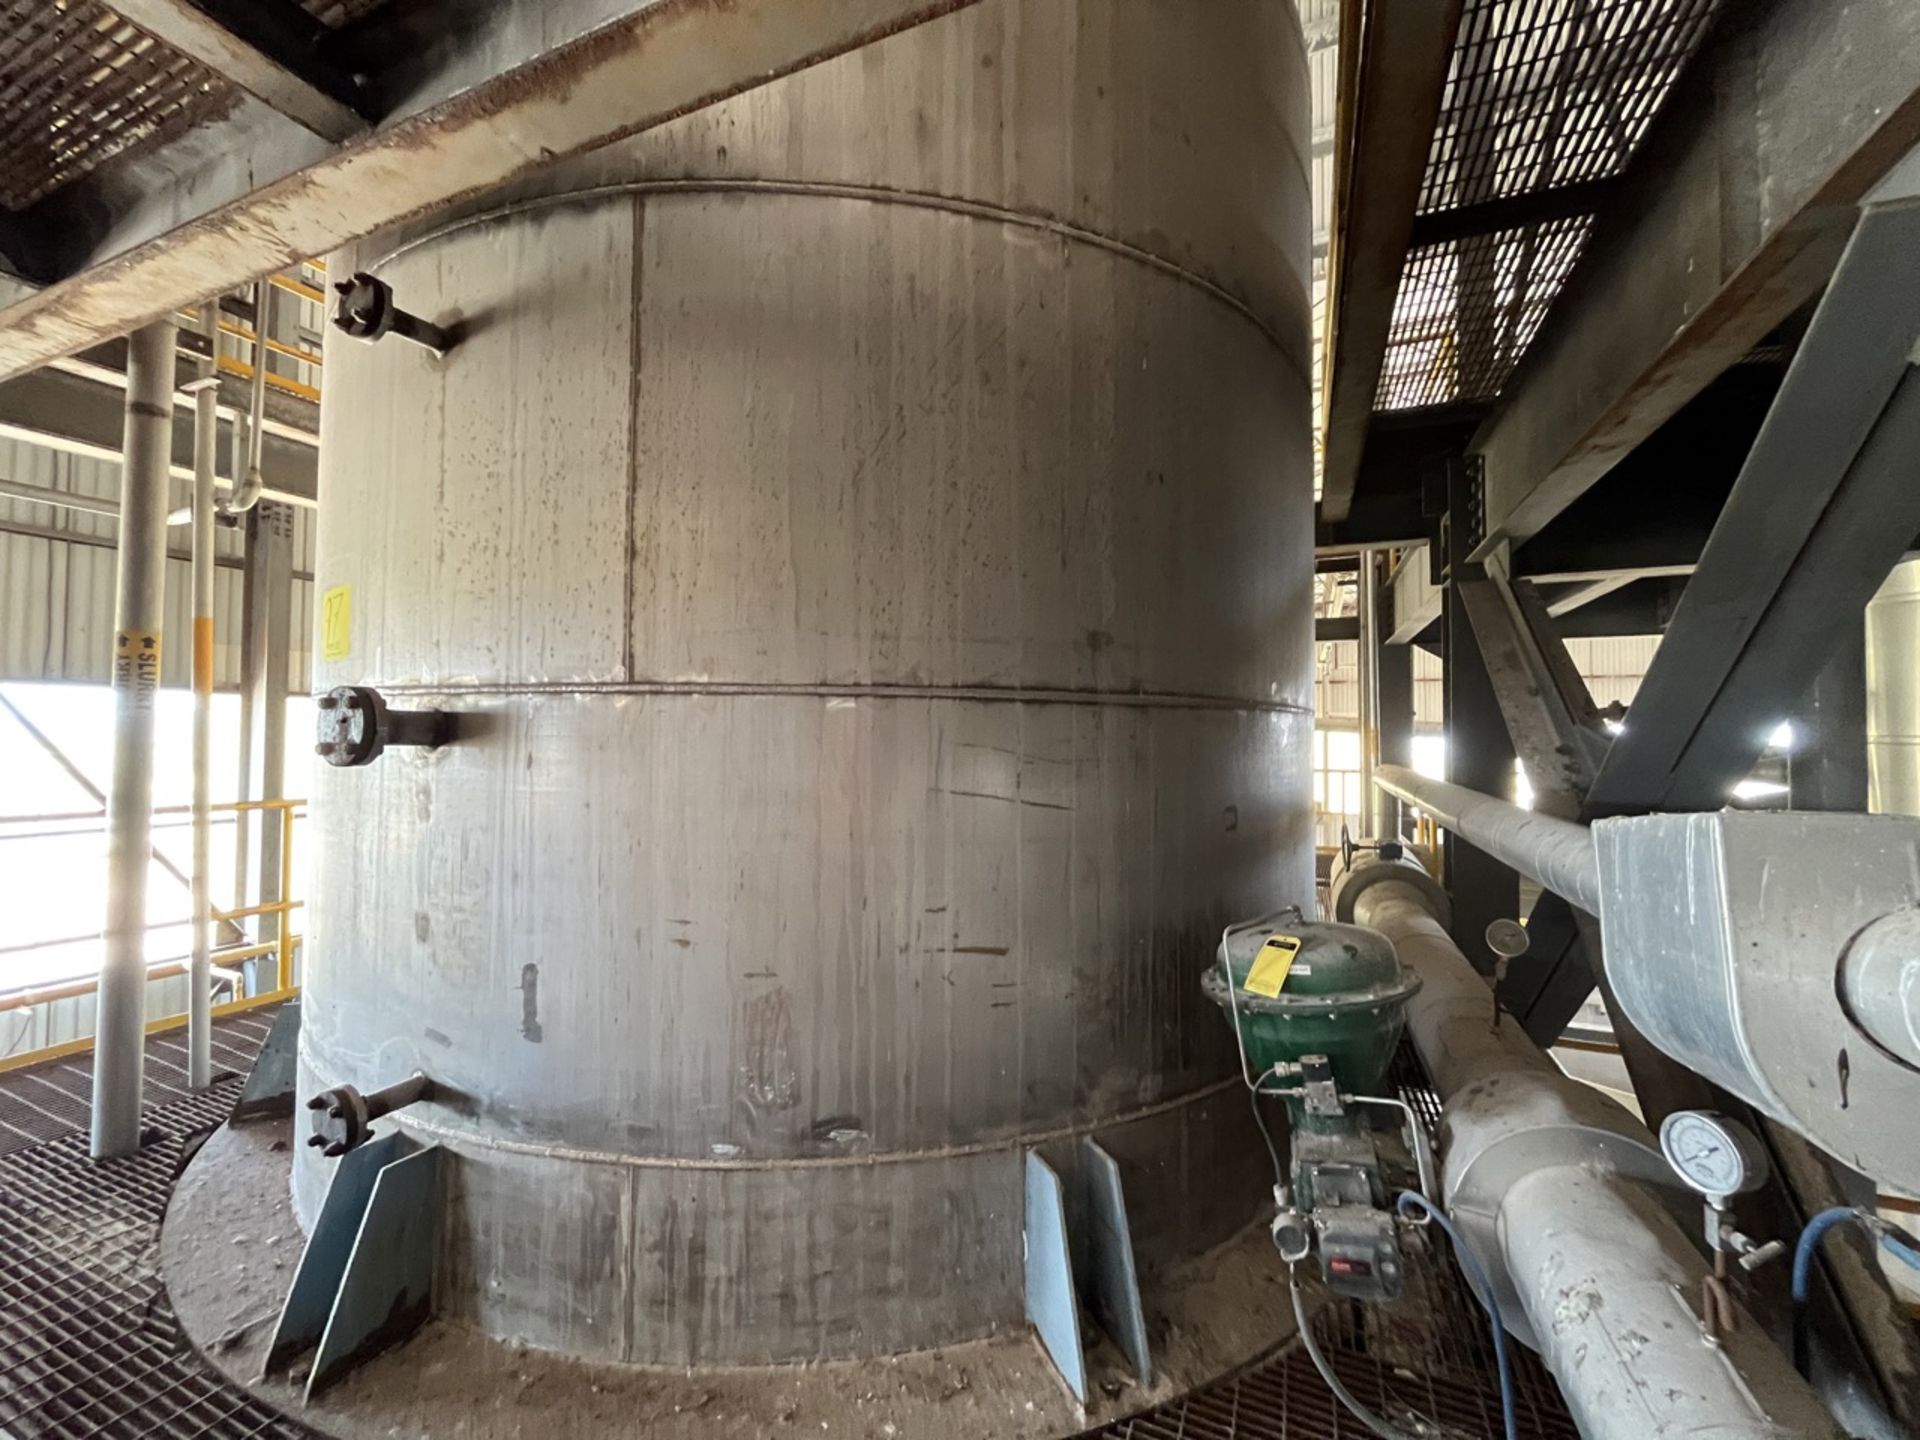 Conical storage tank with stainless steel toriesferica lid measures approximately 4.30 meters in di - Bild 20 aus 37